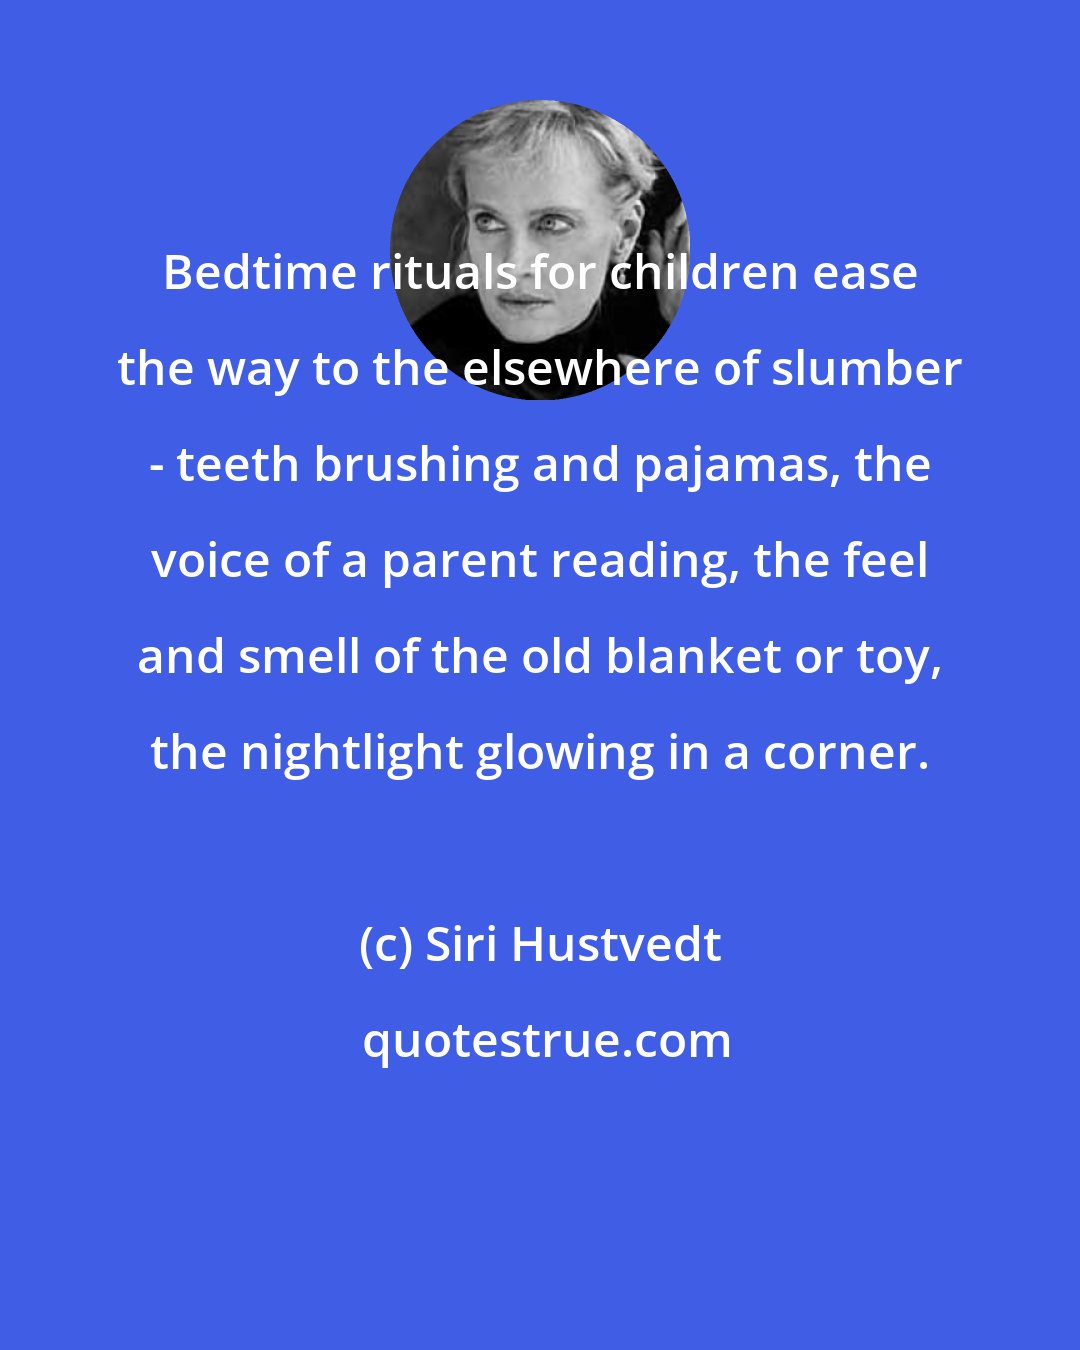 Siri Hustvedt: Bedtime rituals for children ease the way to the elsewhere of slumber - teeth brushing and pajamas, the voice of a parent reading, the feel and smell of the old blanket or toy, the nightlight glowing in a corner.